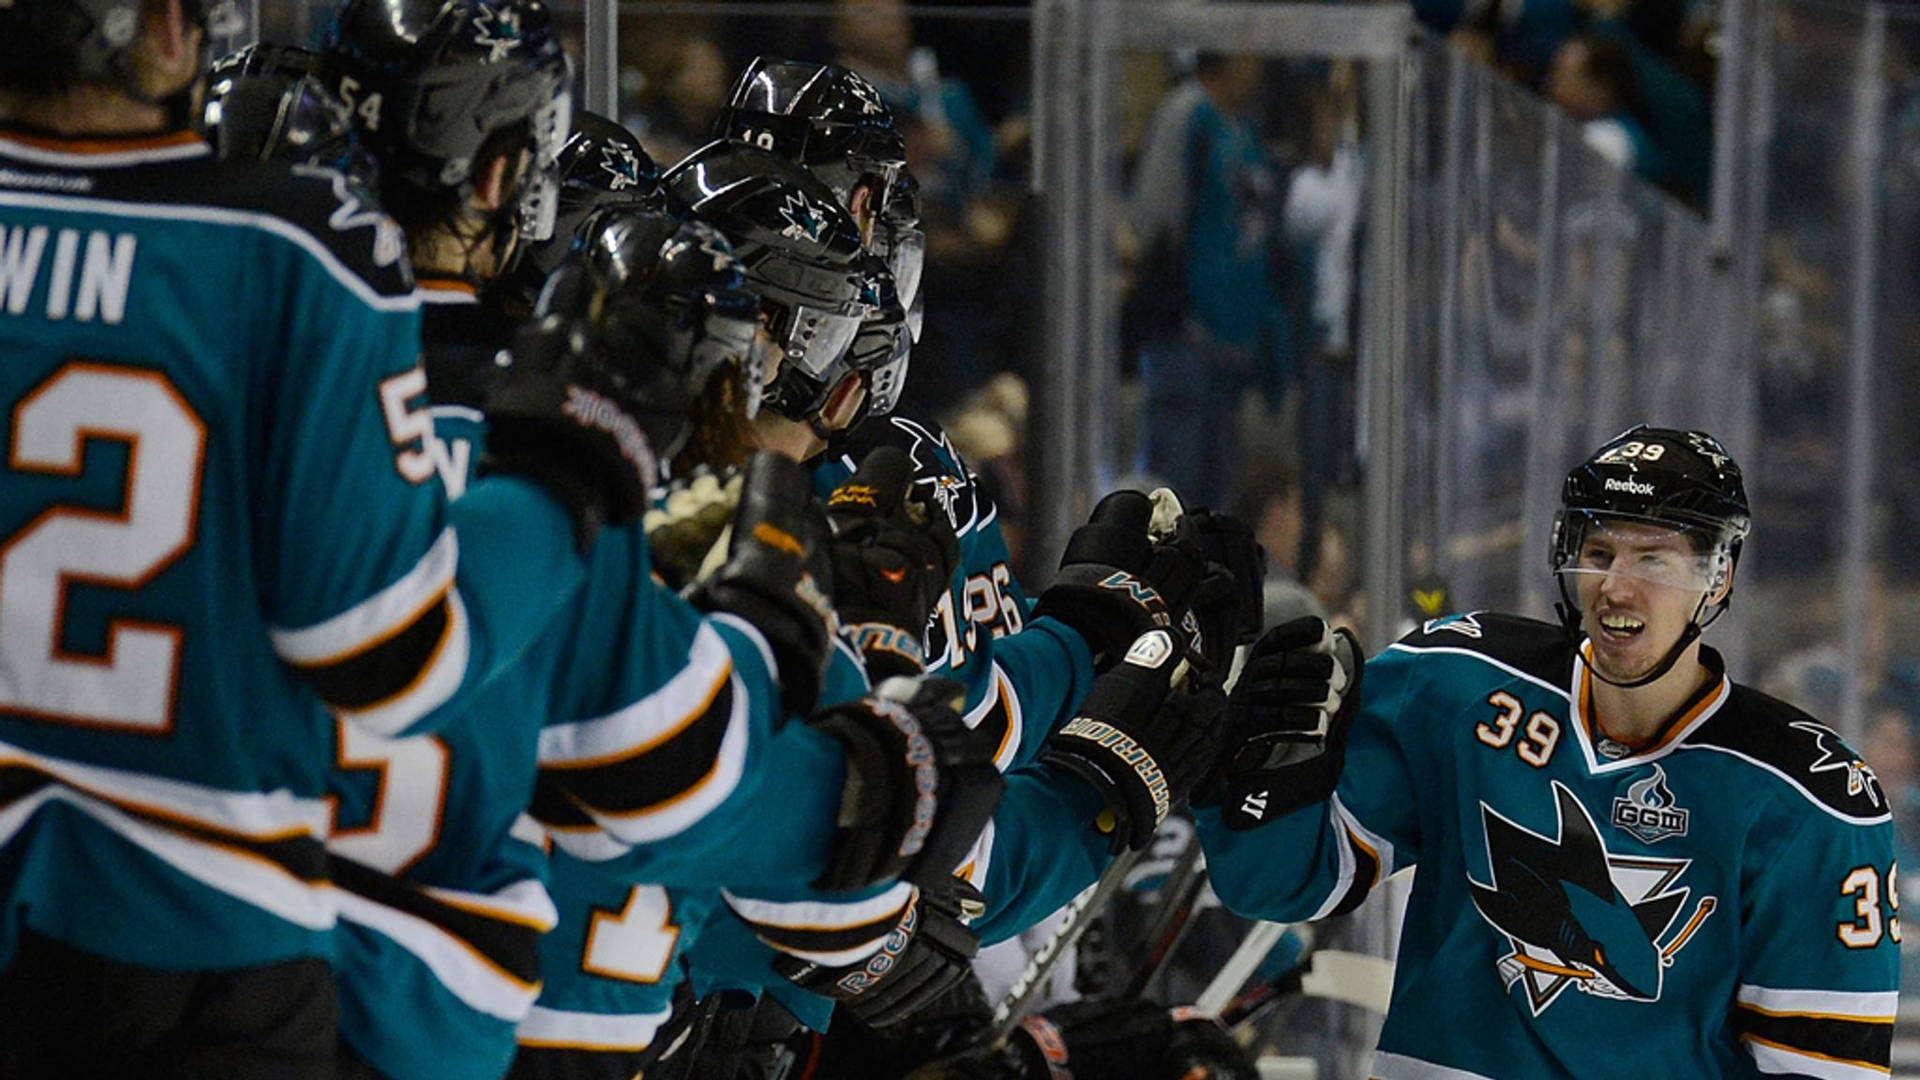 Logan Couture, Professional Ice Hockey Player, Celebrating A Great Play With A Fist Bump To His Teammates.